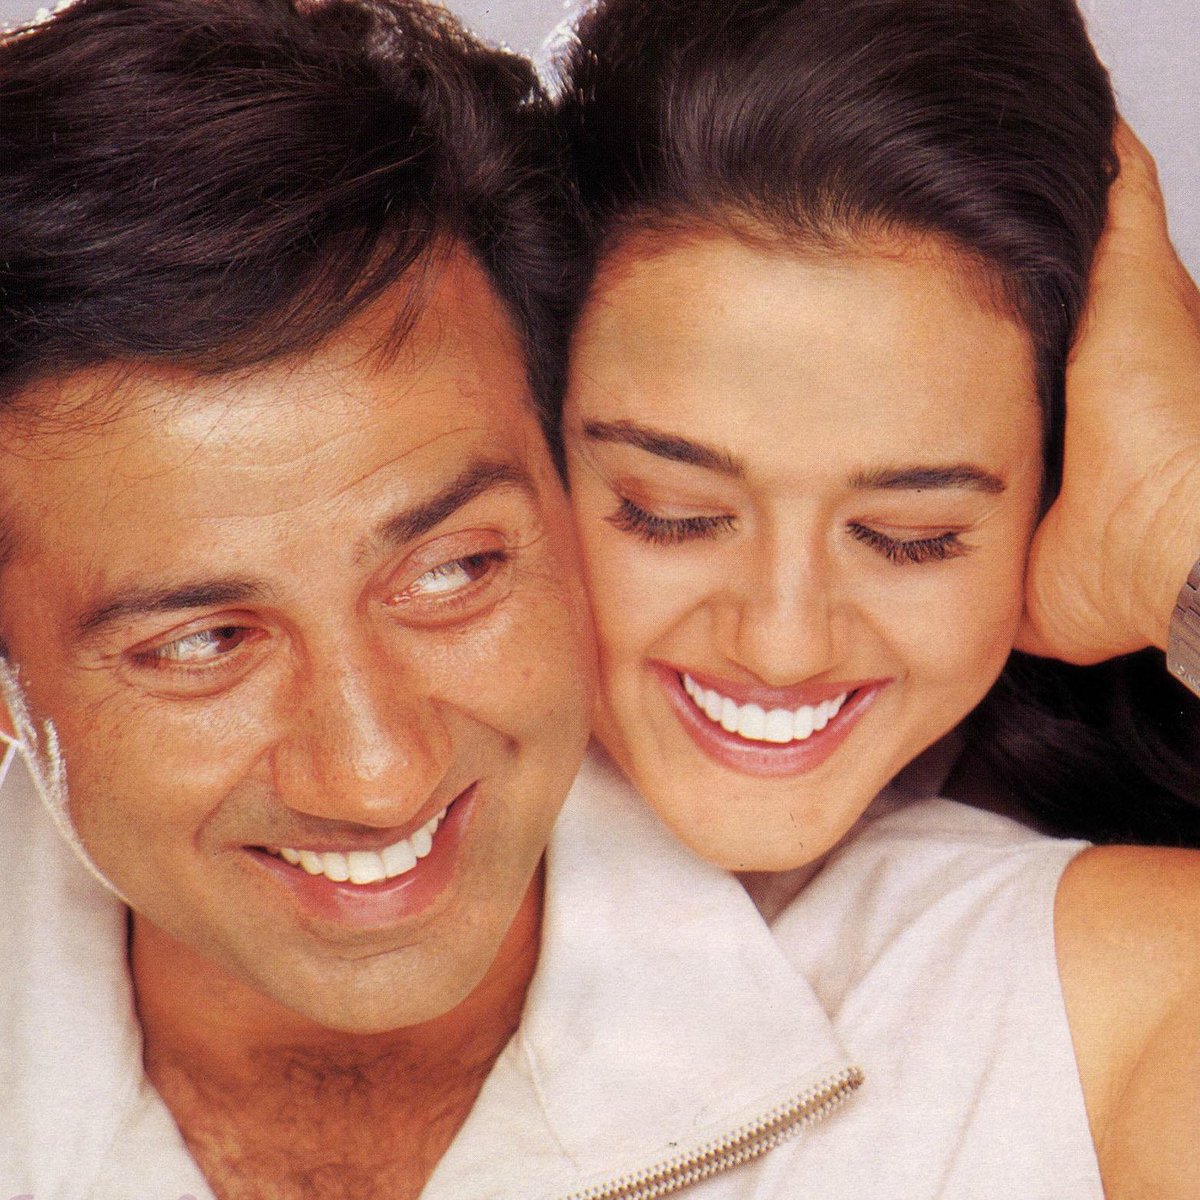 it's boundless joy - knowing that soon they will come back together in #Lahore1947 🥳🎉👏👍😍🥰🙏
 😍 #SunnyDeol  💘 #PreityZinta 😚